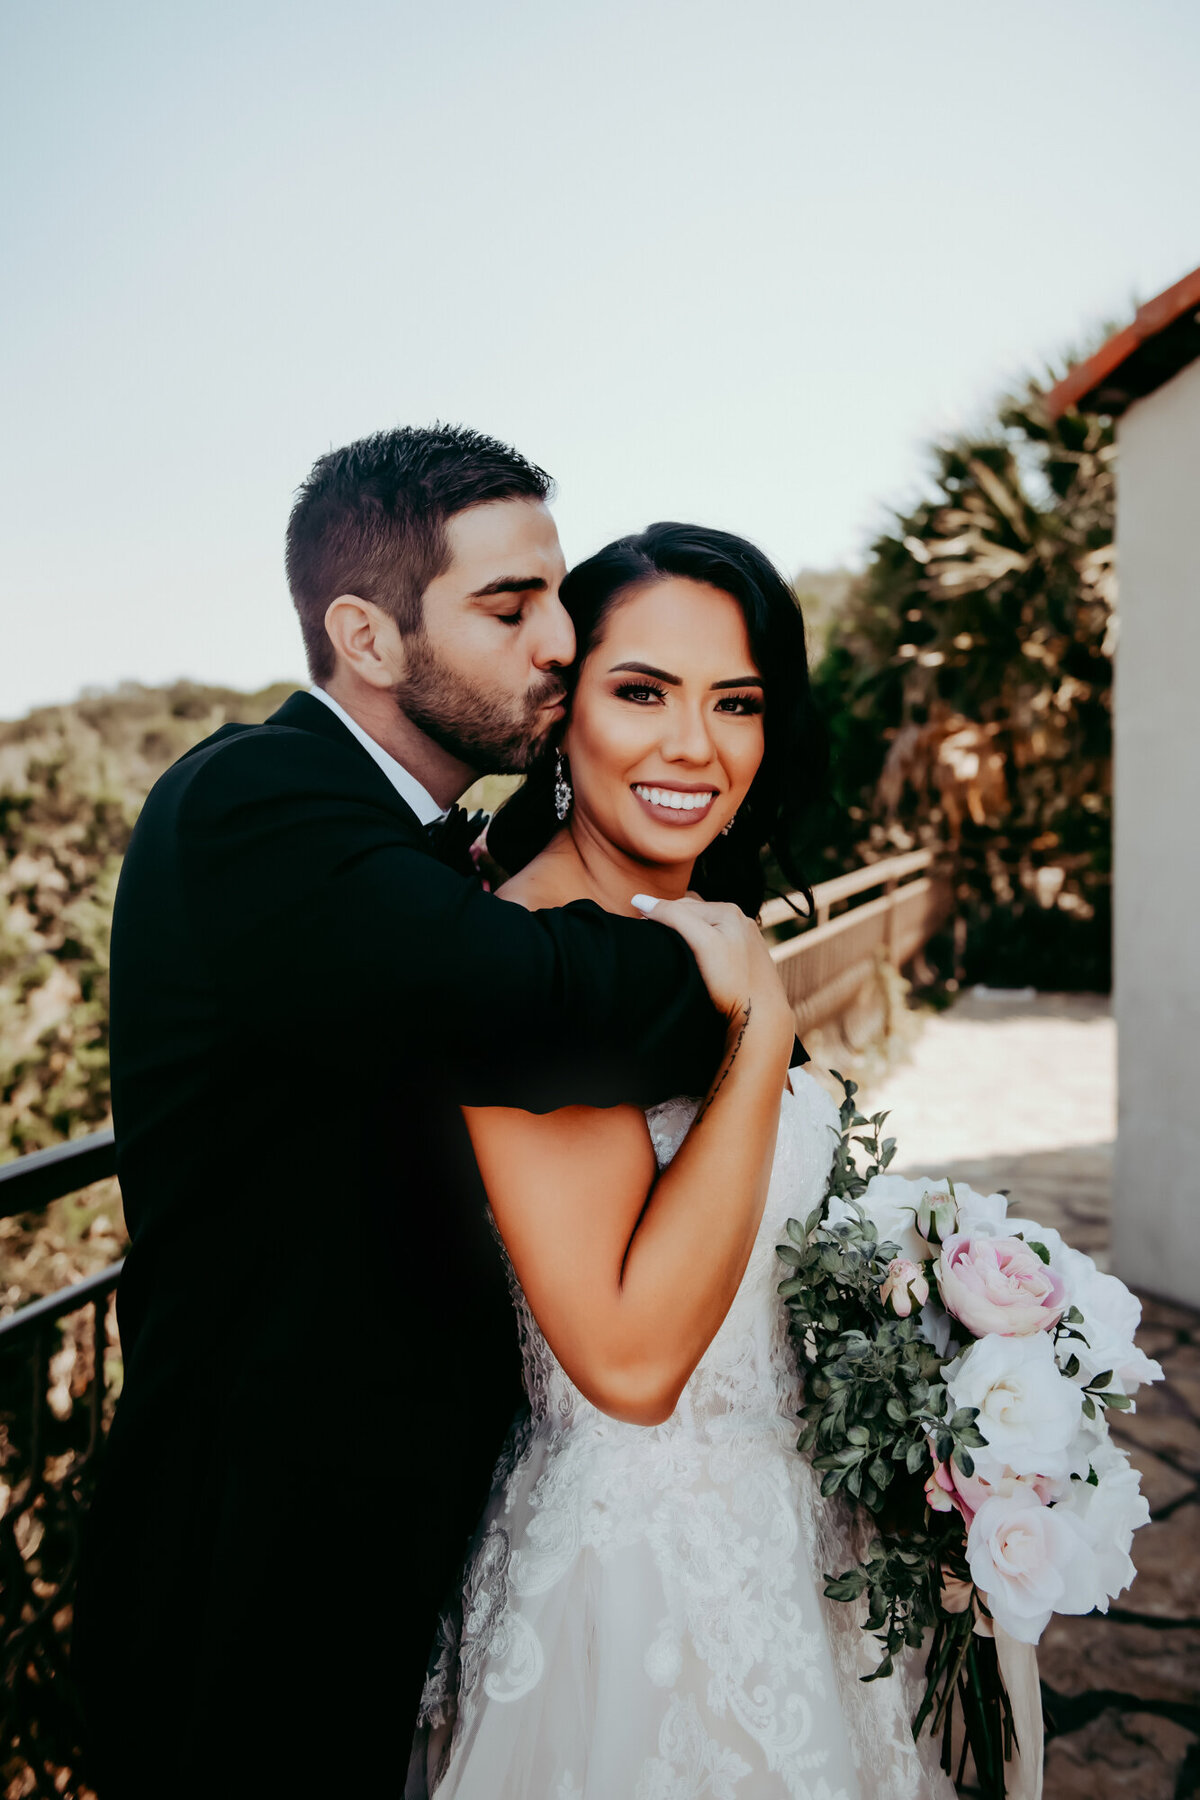 Couples Photographer,  groom embraces bride  and kisses her, she smiles